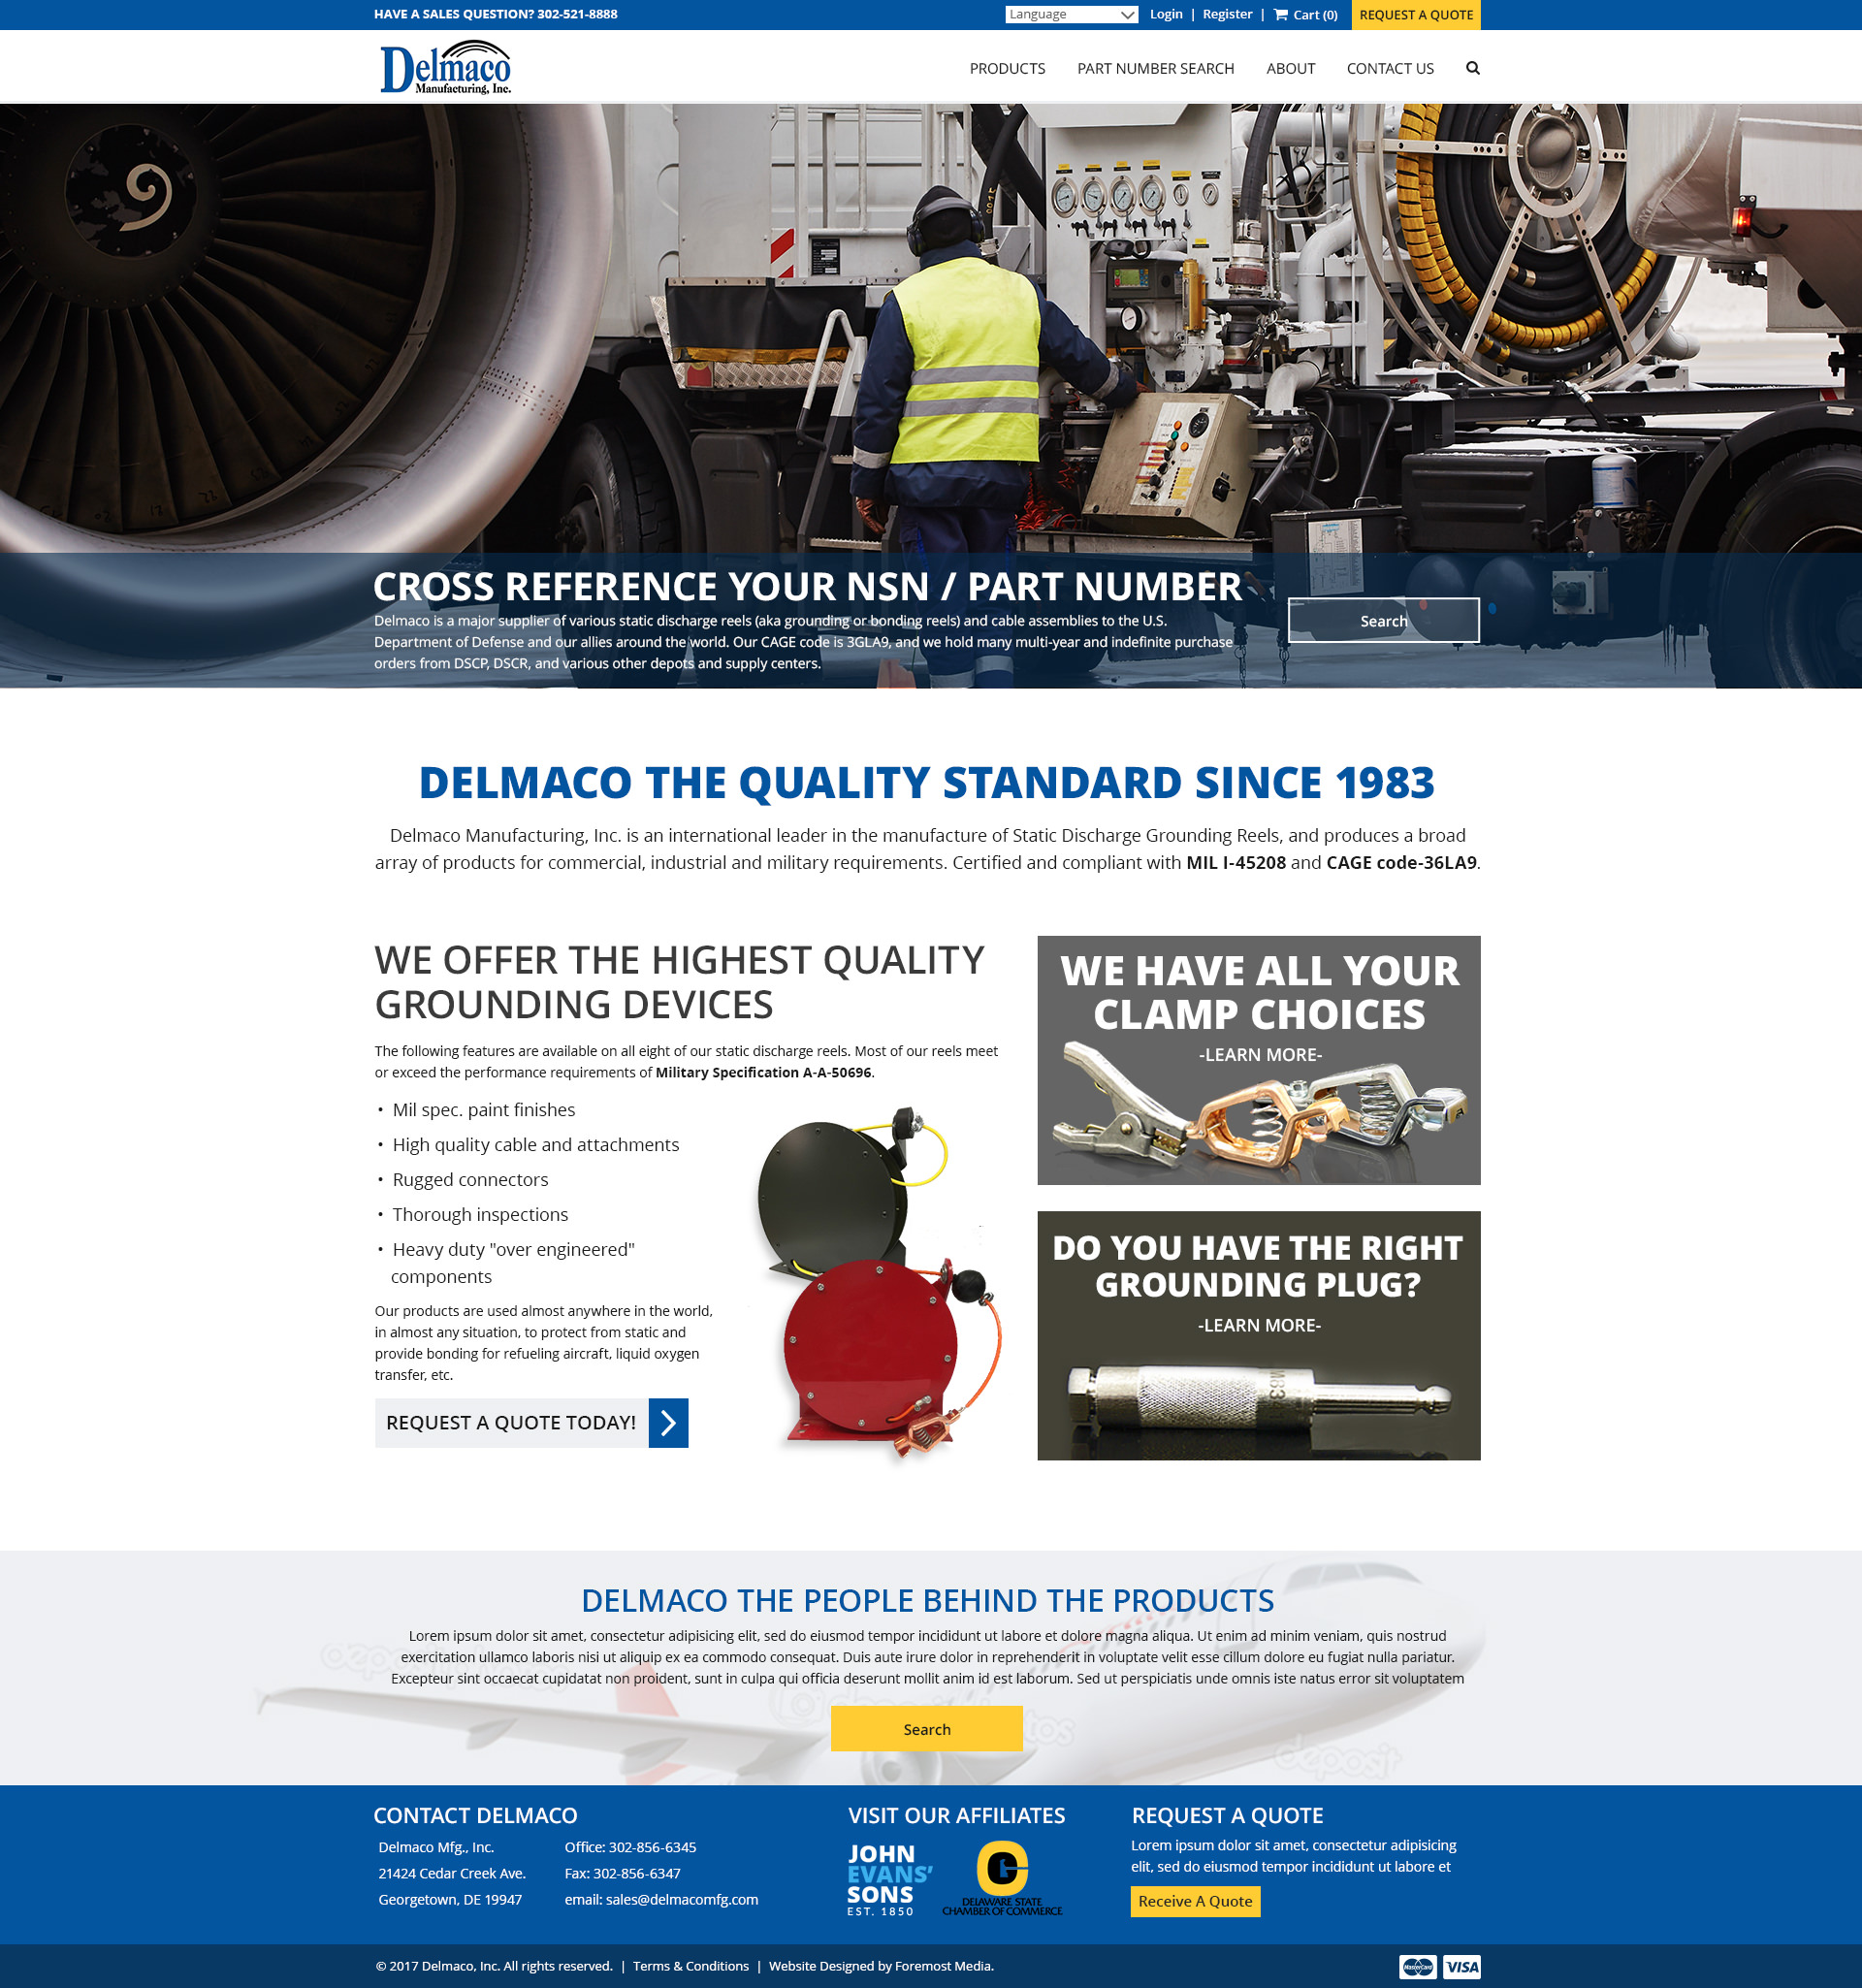 Example of the new and improved nopCommerce website designed by Foremost Media for Delmaco Manufacturing, INC.